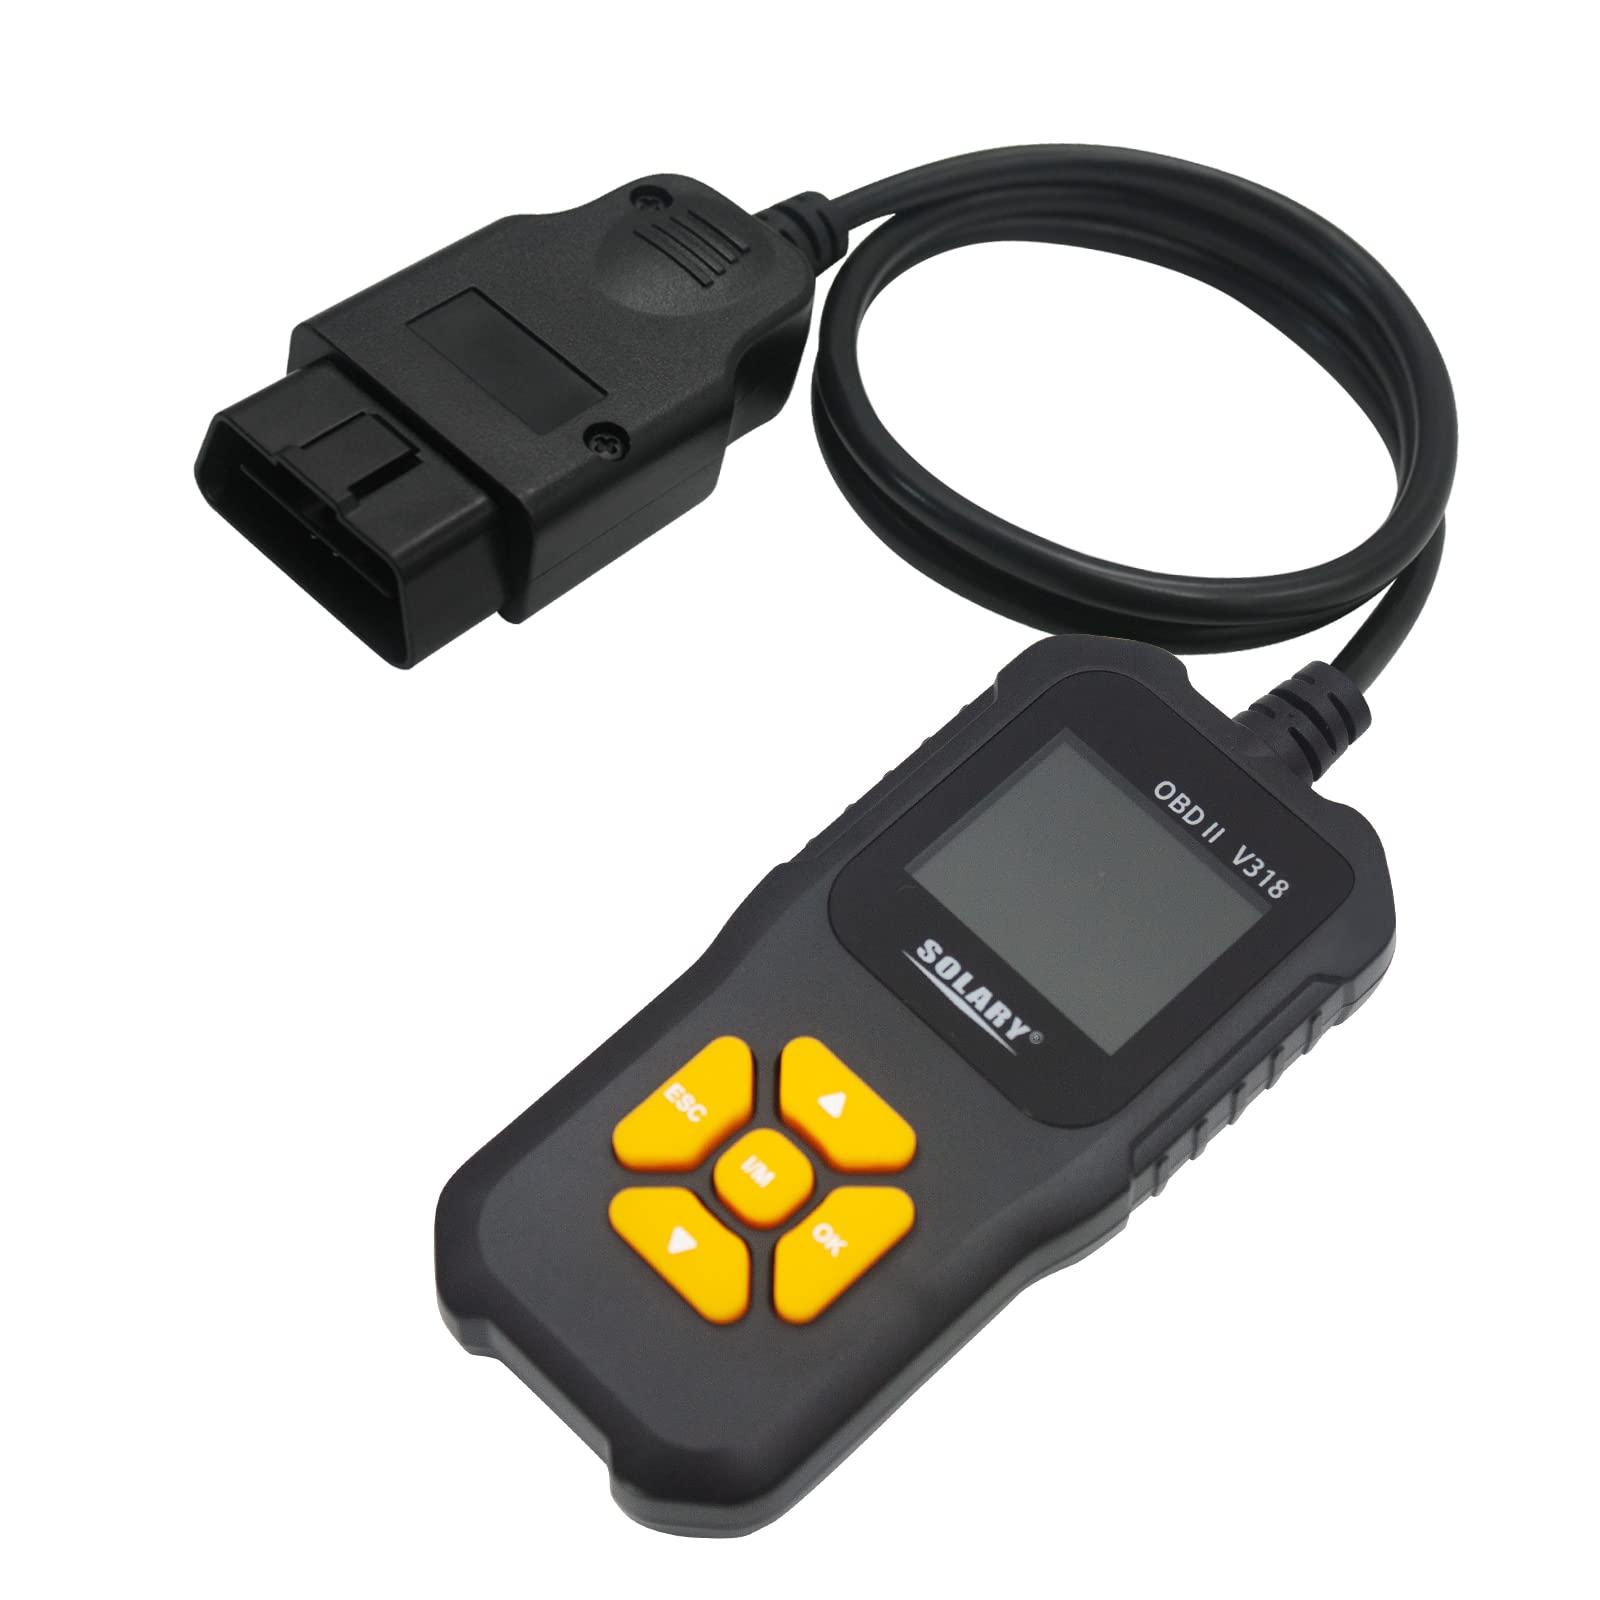 Solary Car OBD2 Scanner Code Reader, V318 OBD2 Scanner Check Engine Light Scan Tool, Professional Diagnostic Scaner for All OBD II Protocol Cars - Auto Body Collision Repair Welding Products